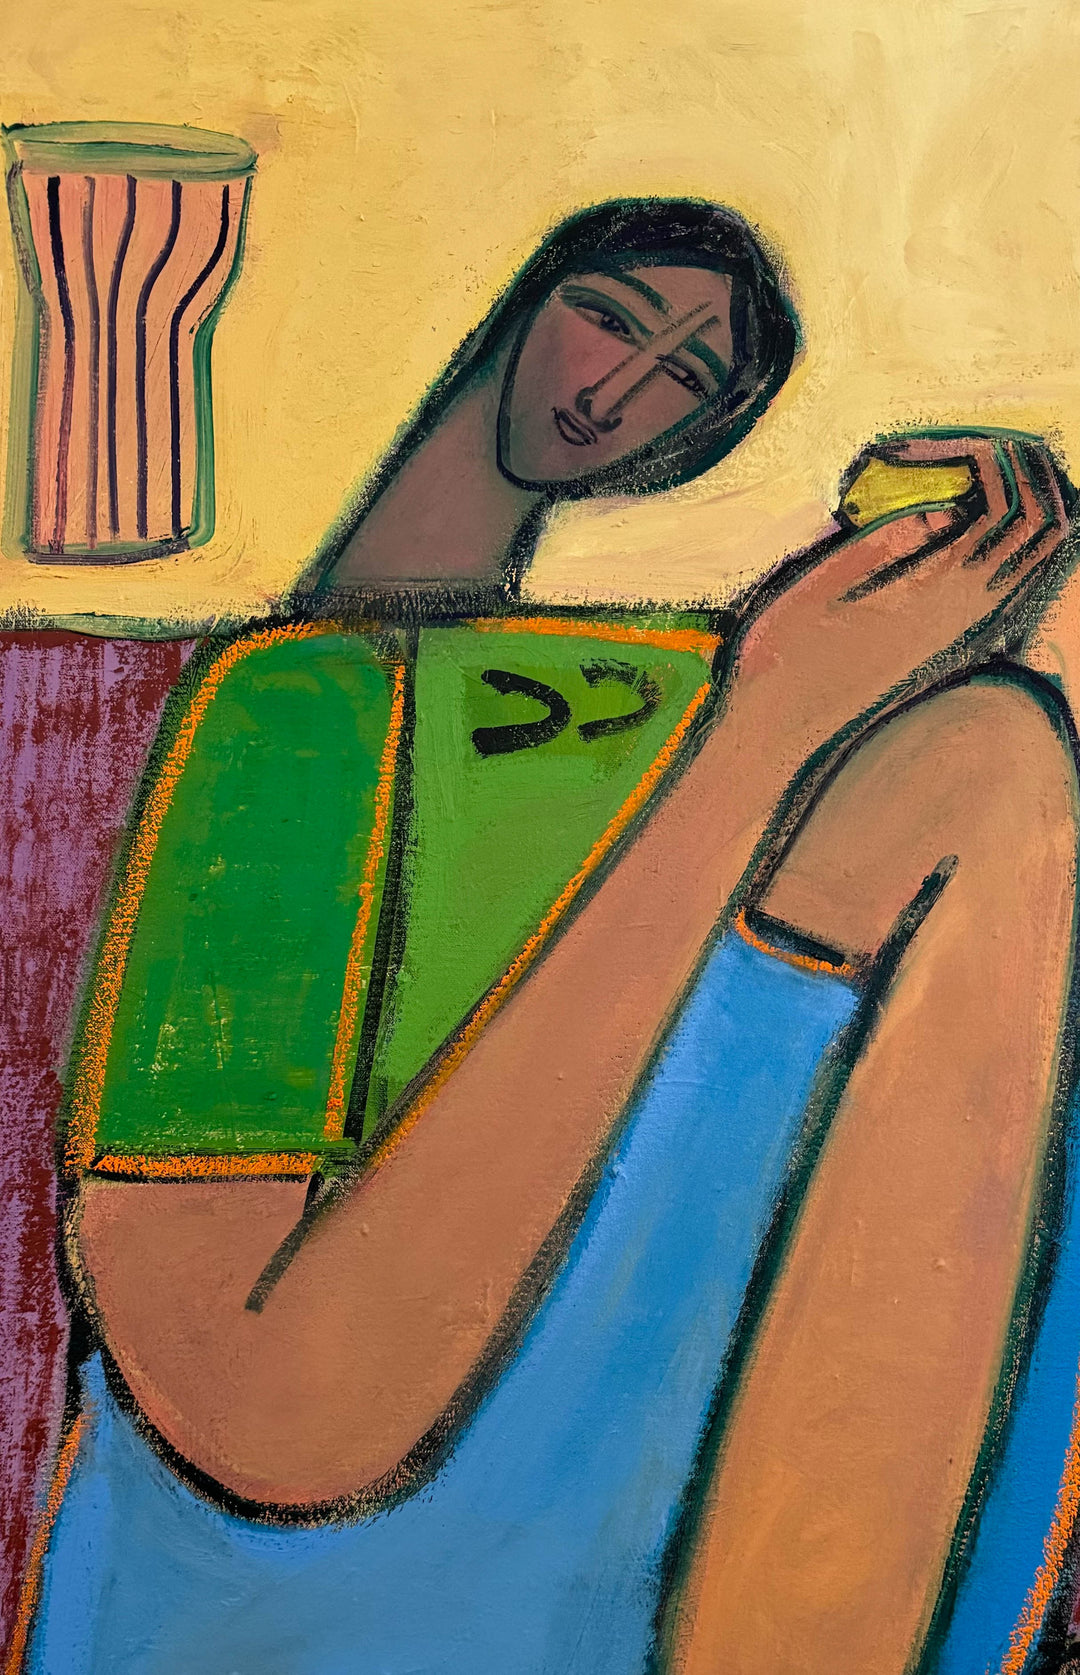 Woman with foot stool, vase and lemon